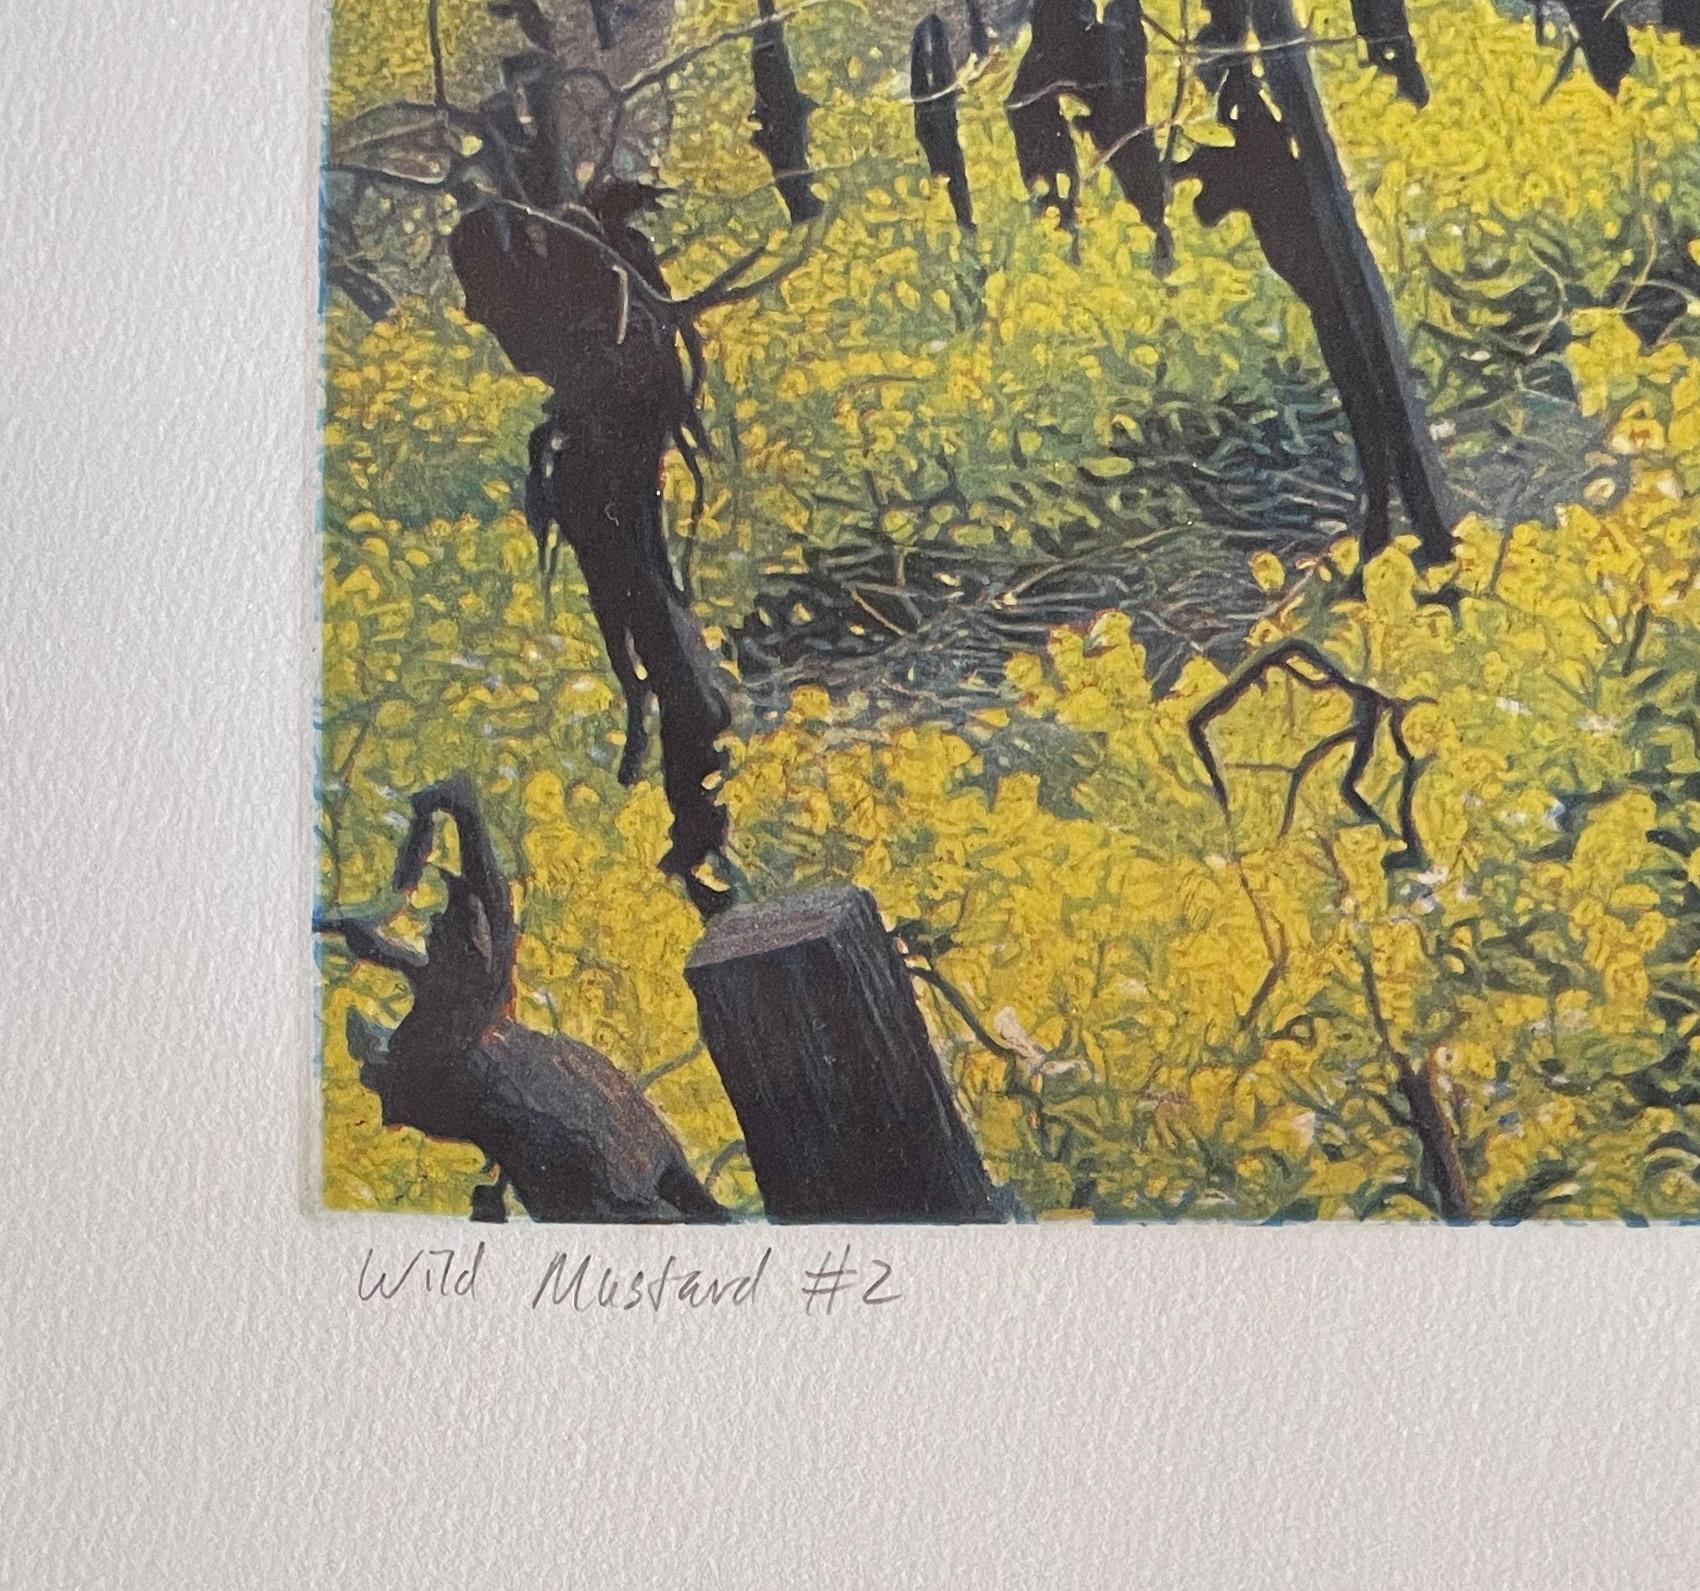 Wild mustard flowers in the vineyards of southwest Napa Valley, Napa County, California. Signed and numbered etching and aquatint from the edition of 250.

Born in Berkeley, California, on December 21, 1949, he was raised in a home that had a